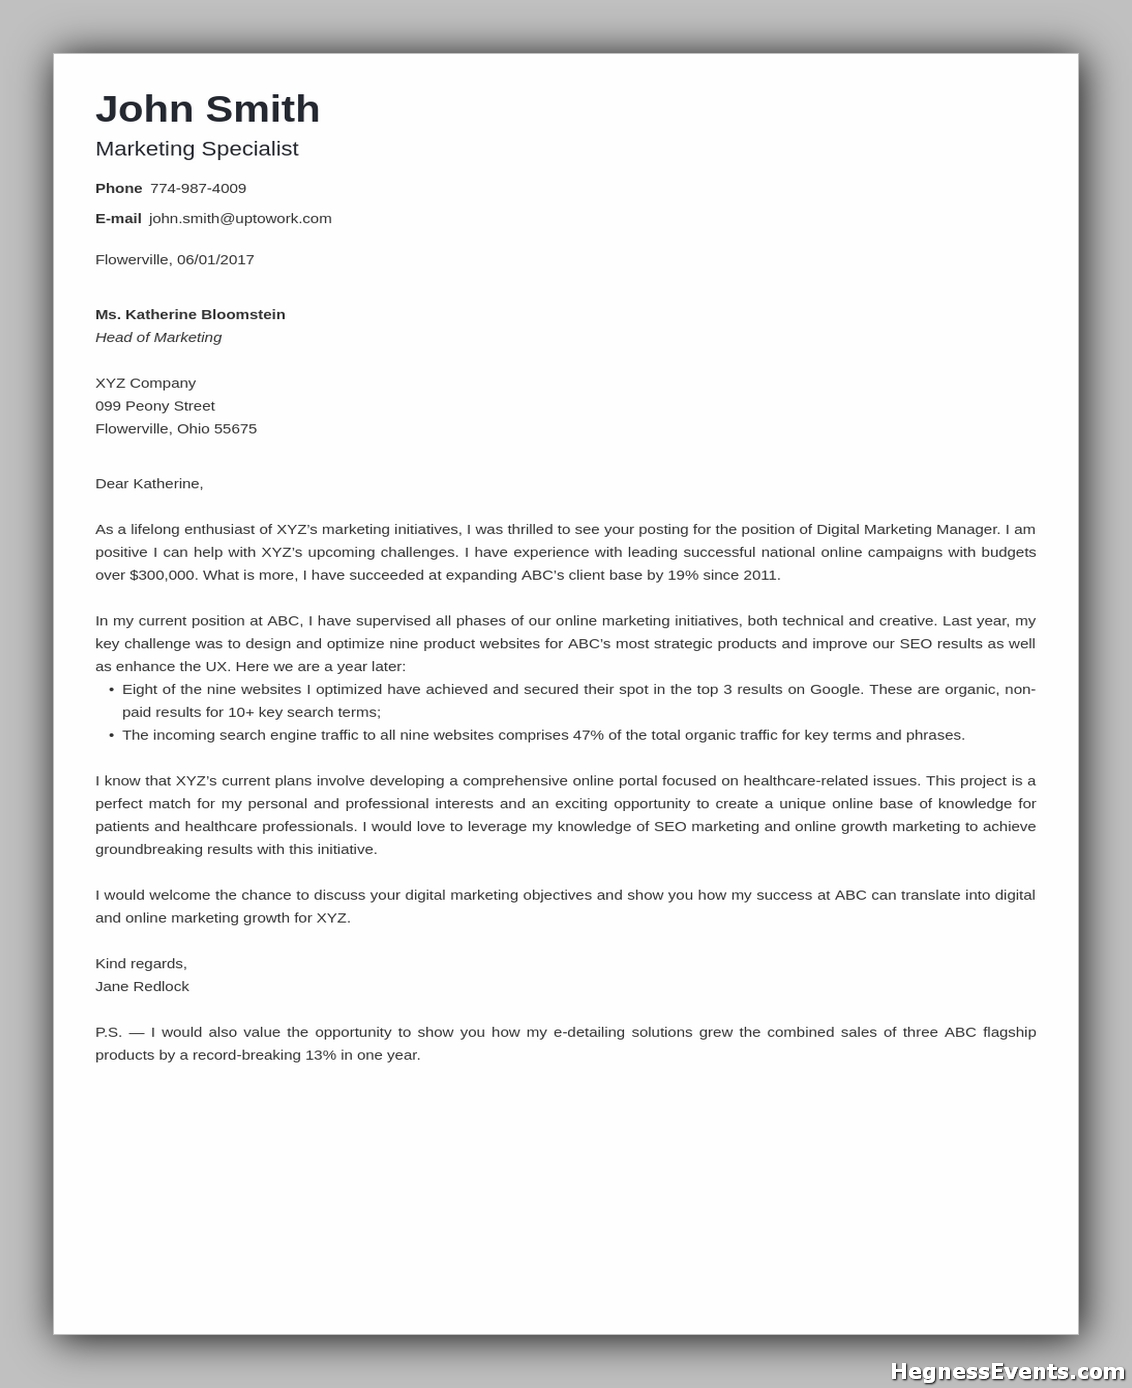 25 Powerful Cover Letter Templates Examples - hennessy events